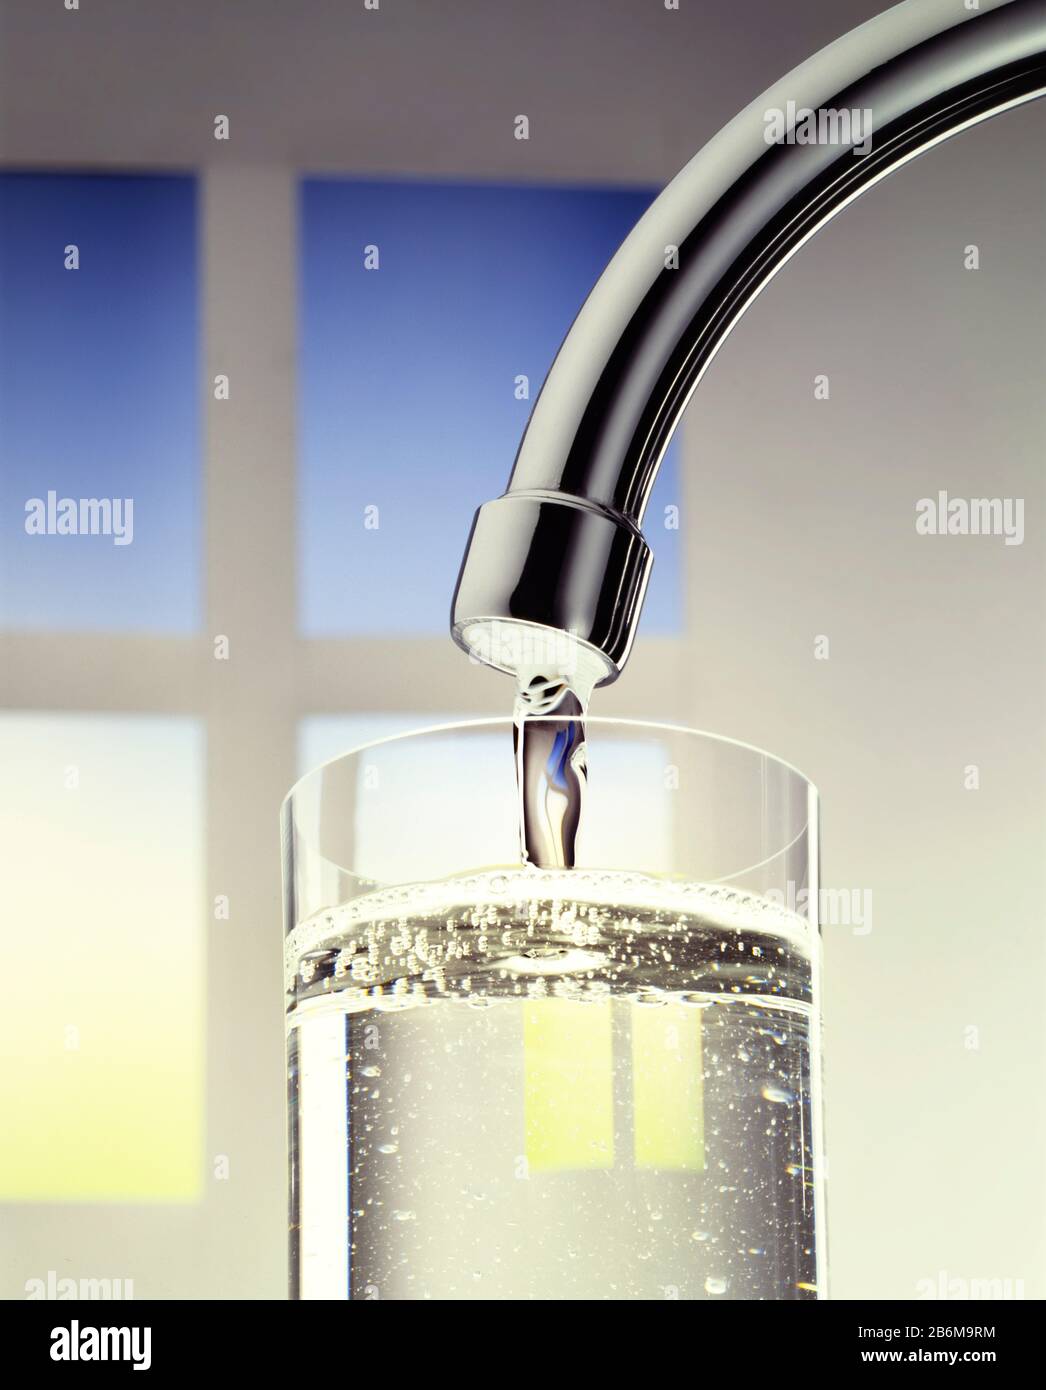 A kitchen tap delivers clear water to a drinking glass. Stock Photo